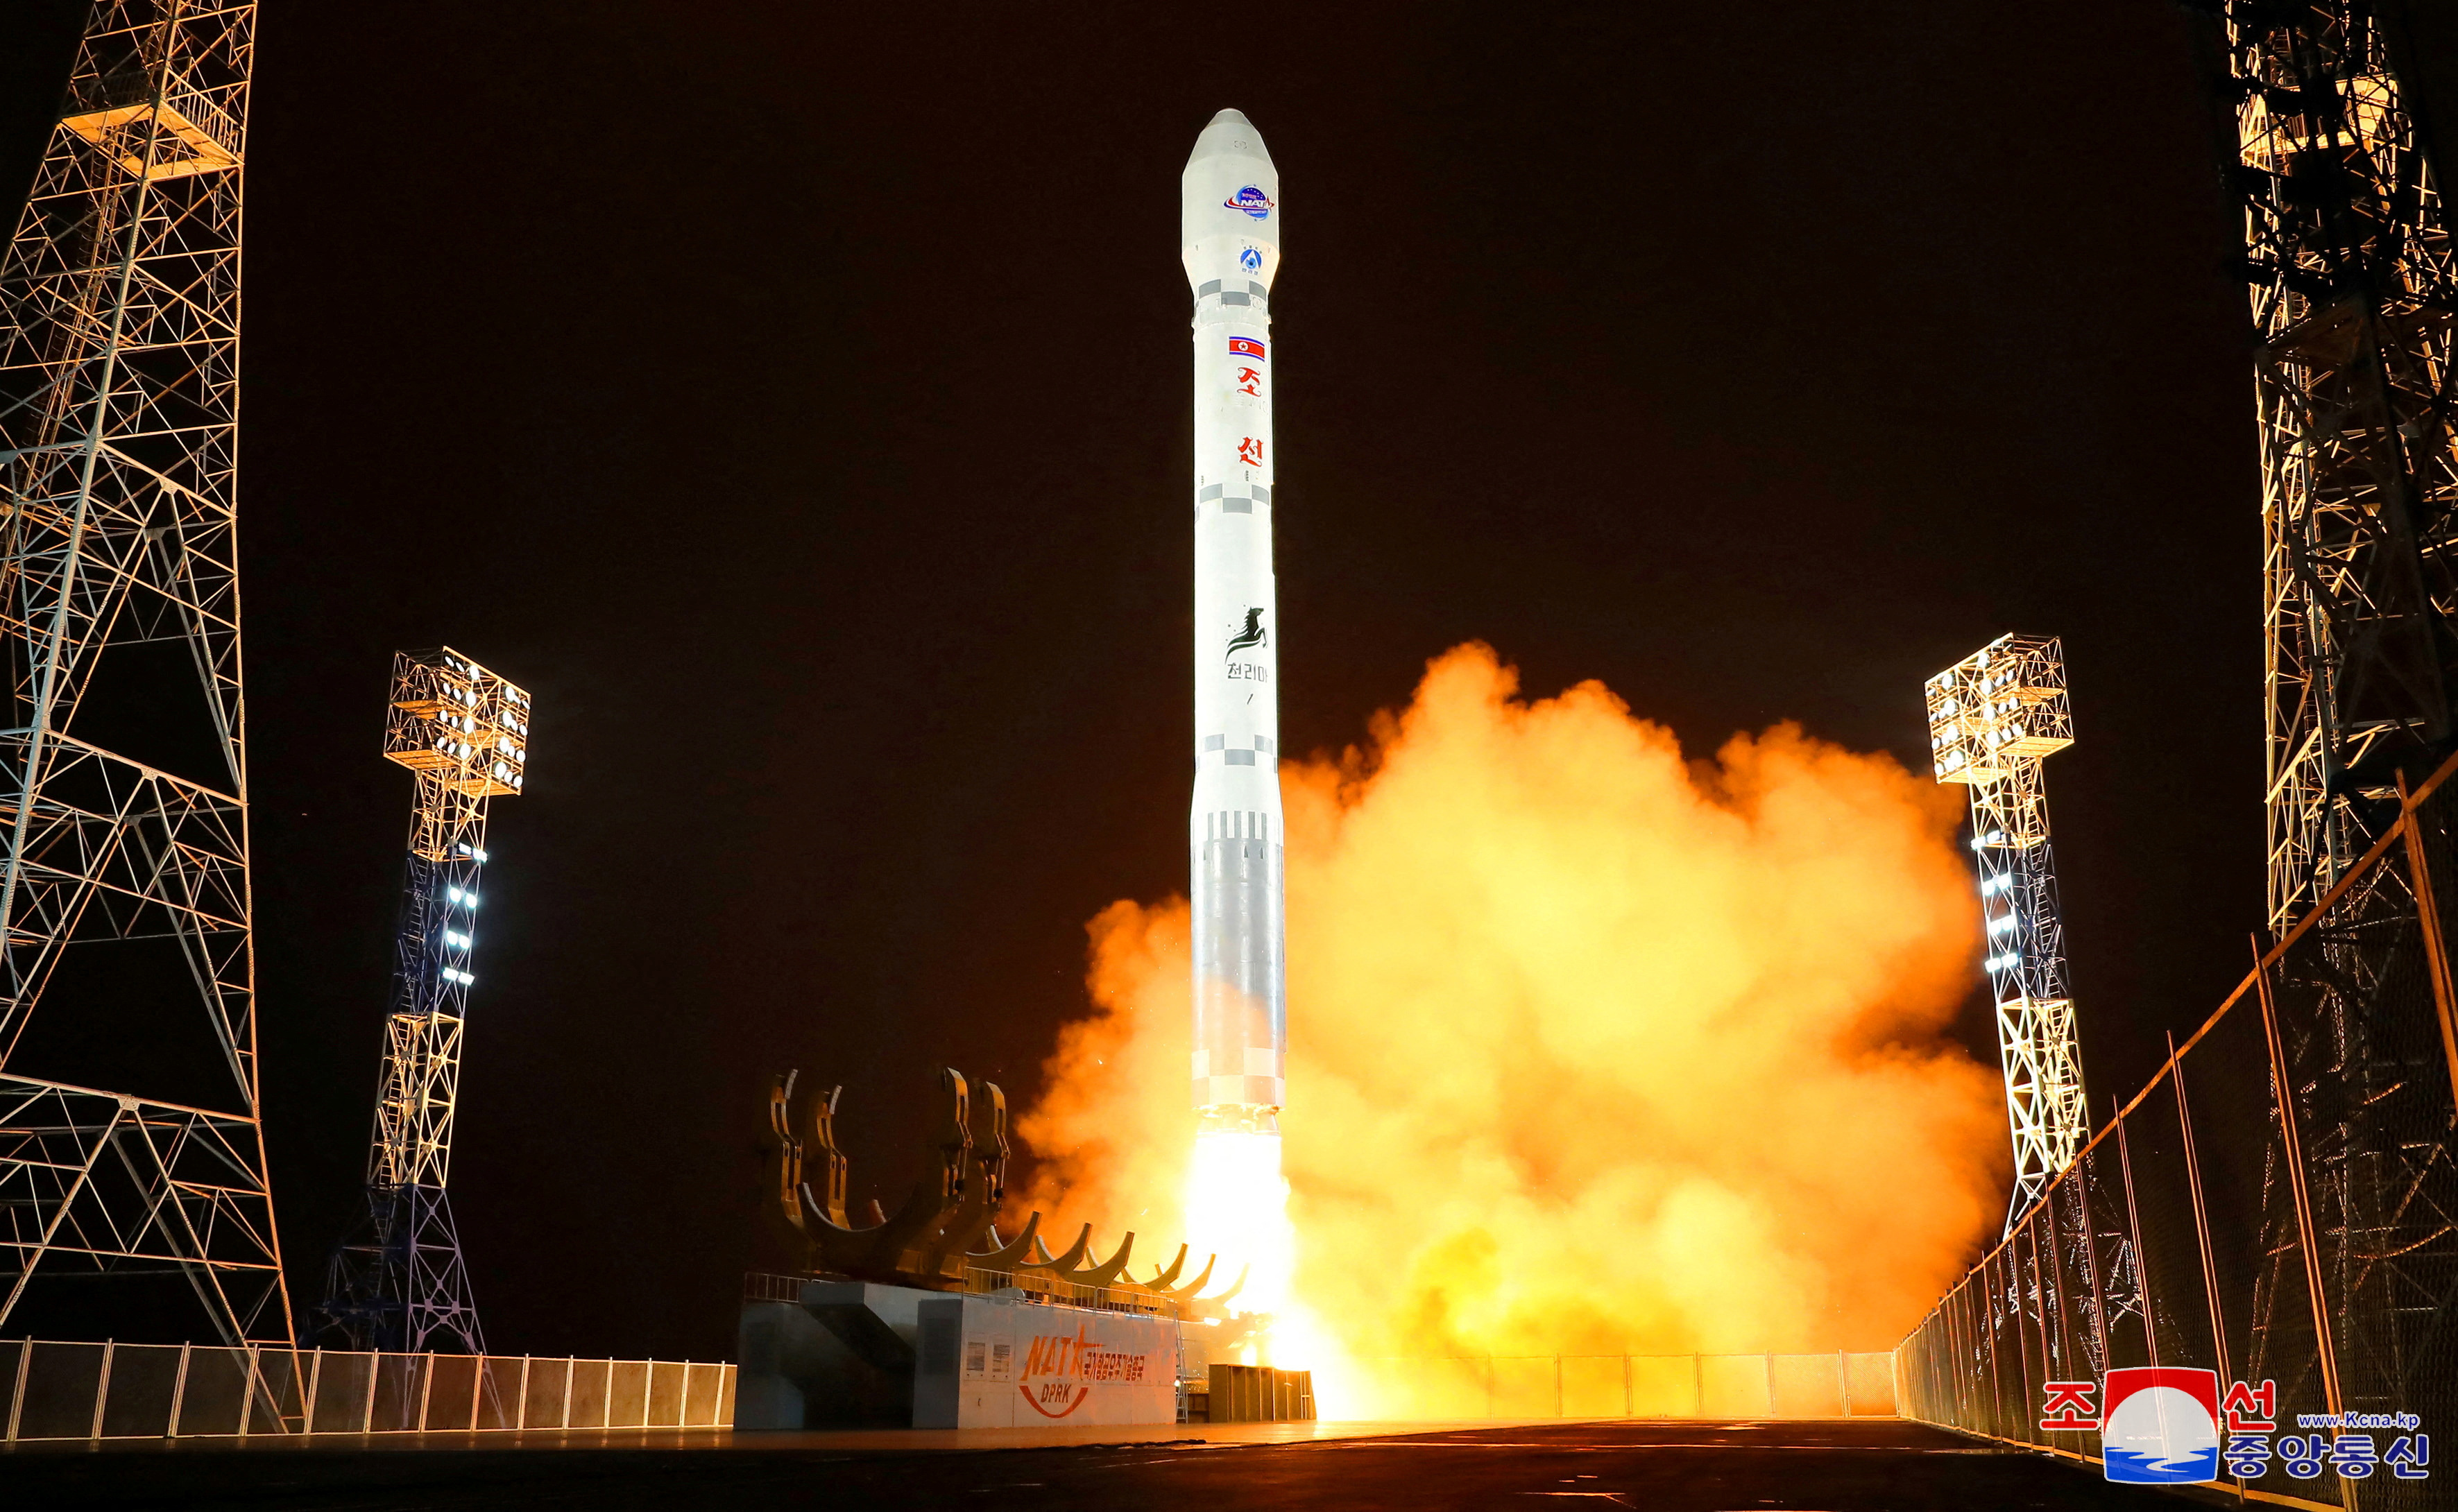 North Korea claims it launched first spy satellite